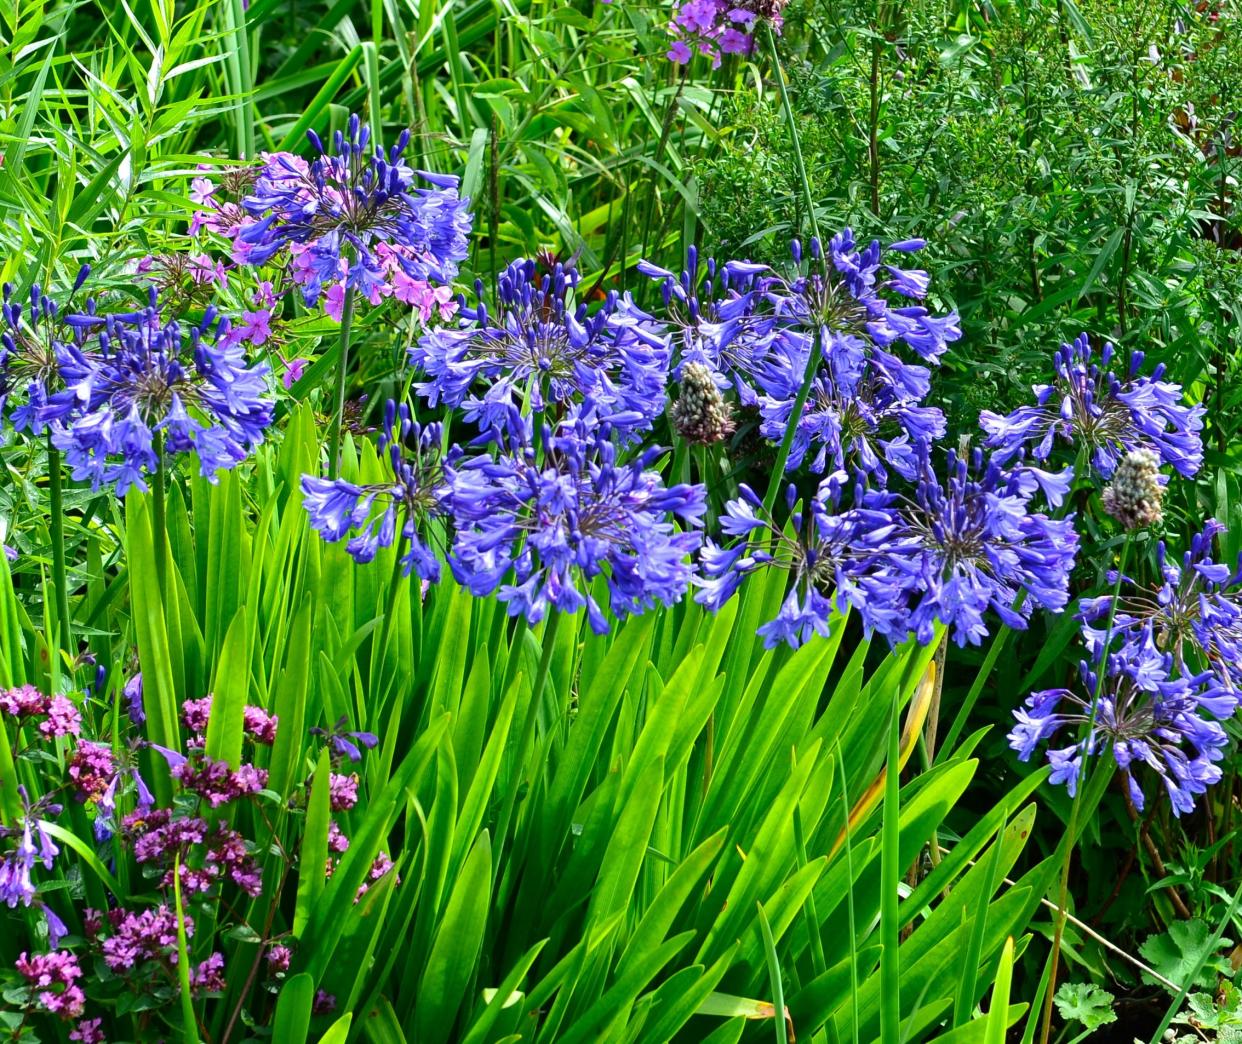 A favorite of garden columnist Betty Montgomery, 'Galaxy Blue' have  tall, slender stalks,  topped with flowers that are a dramatic shade of blue with streaks of a darker blue.